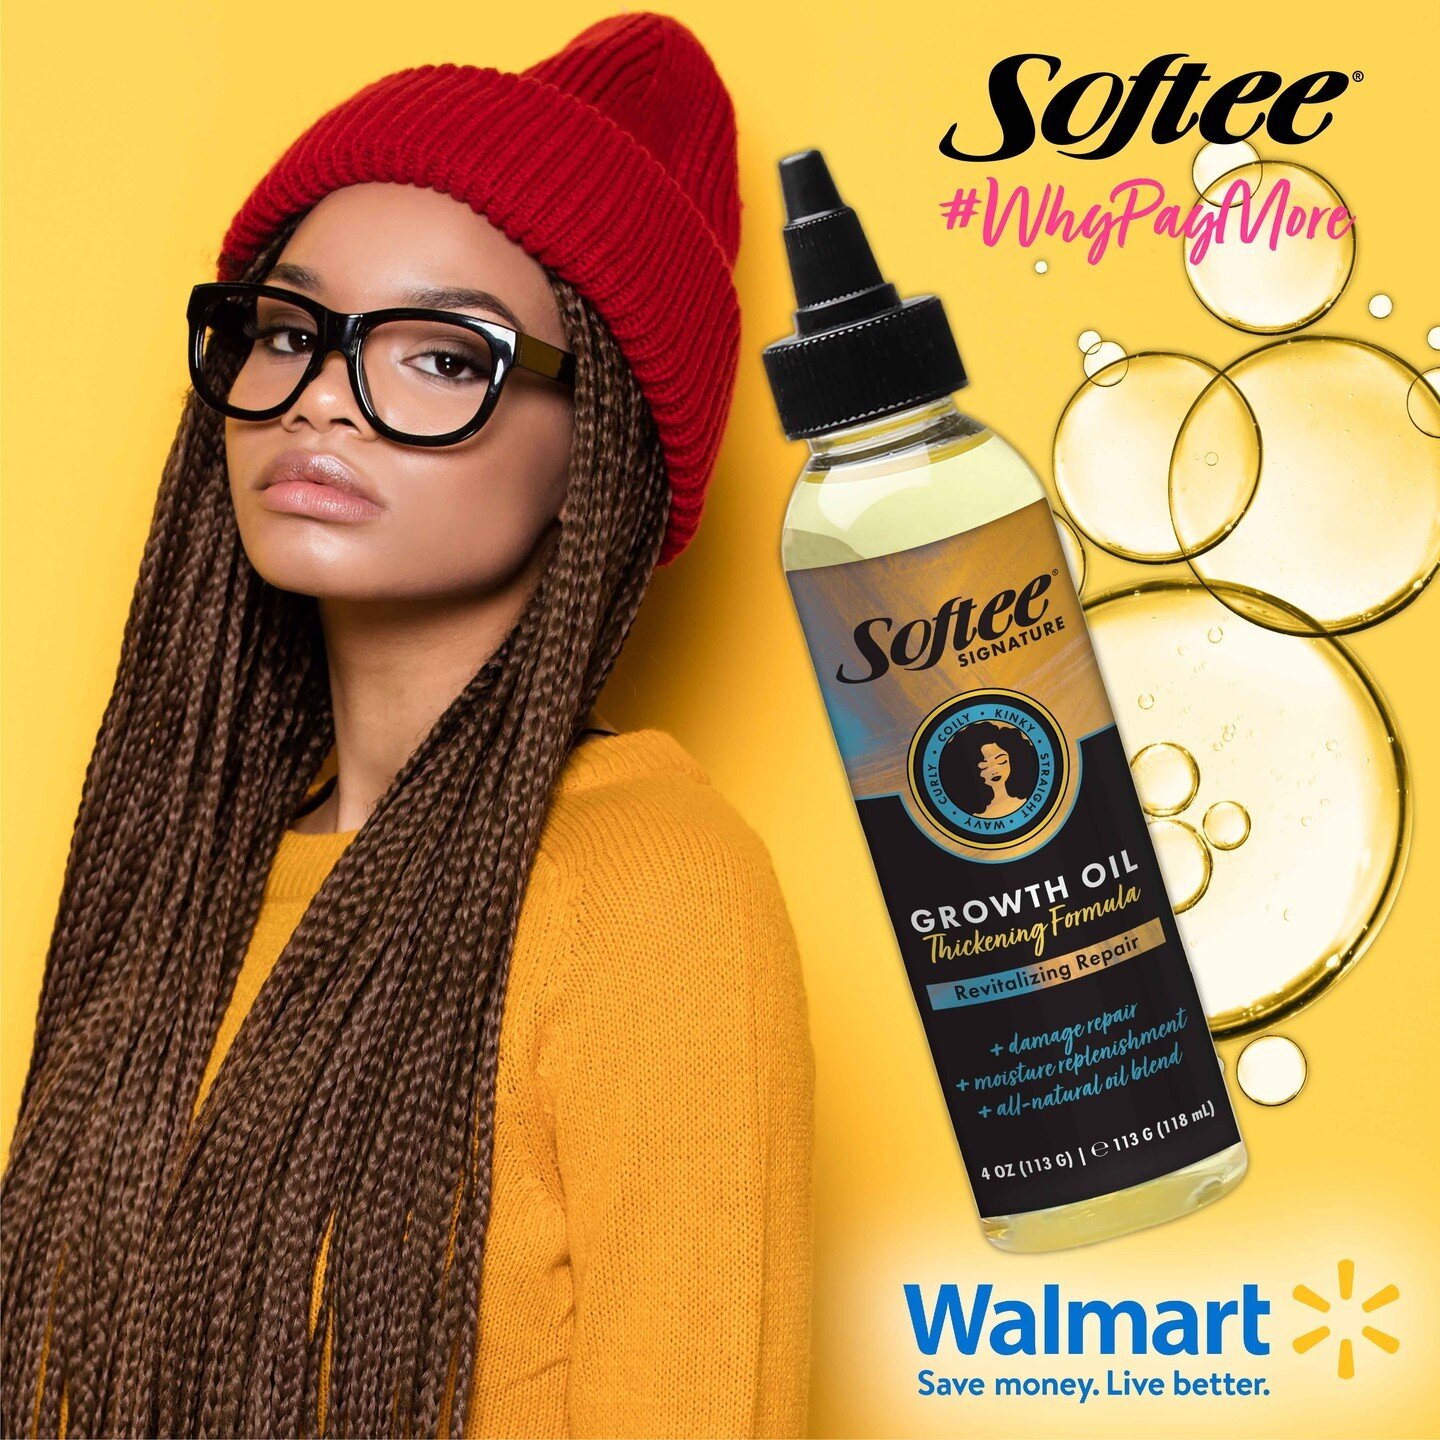 Your hair is 90% your selfie!  Softee Signature Growth Oil helping girls grow their locks the length of their dreams!  Find it now on shelves at #Walmart !

#softeeproducts
#whypaymore
#affordablehaircare
#healthyhair
#curlyhair
#naturalhair
#texture